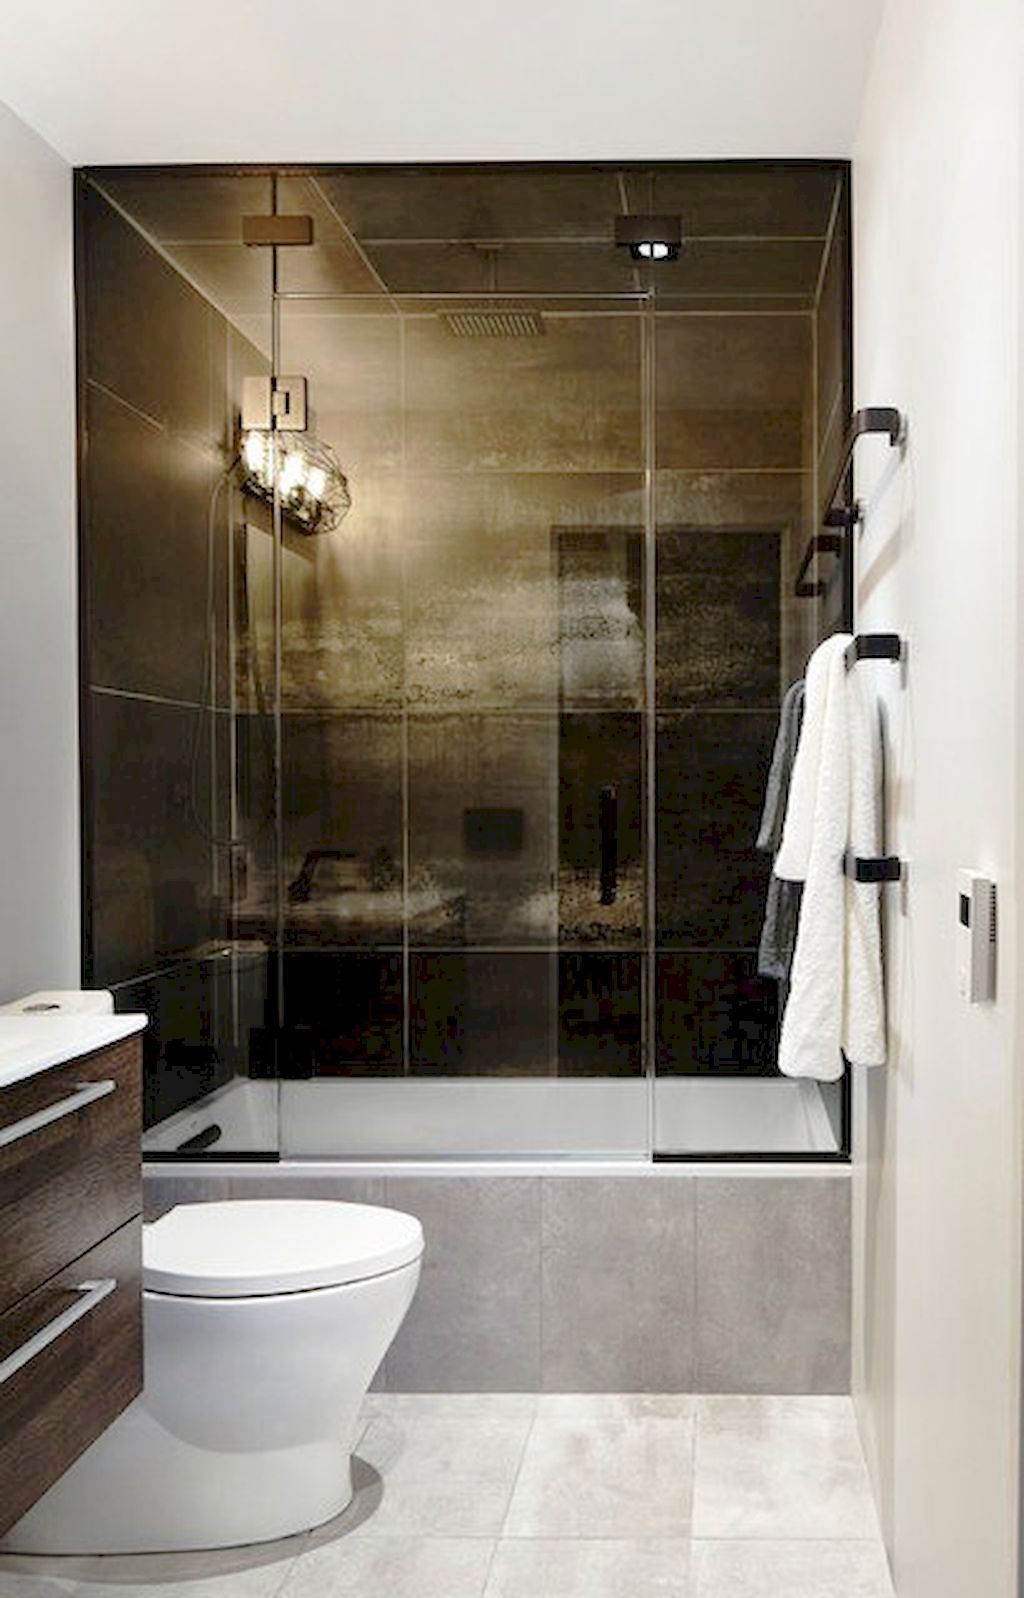 How to Use Low Budget to Remodel Small Master Bathroom - Decor Units